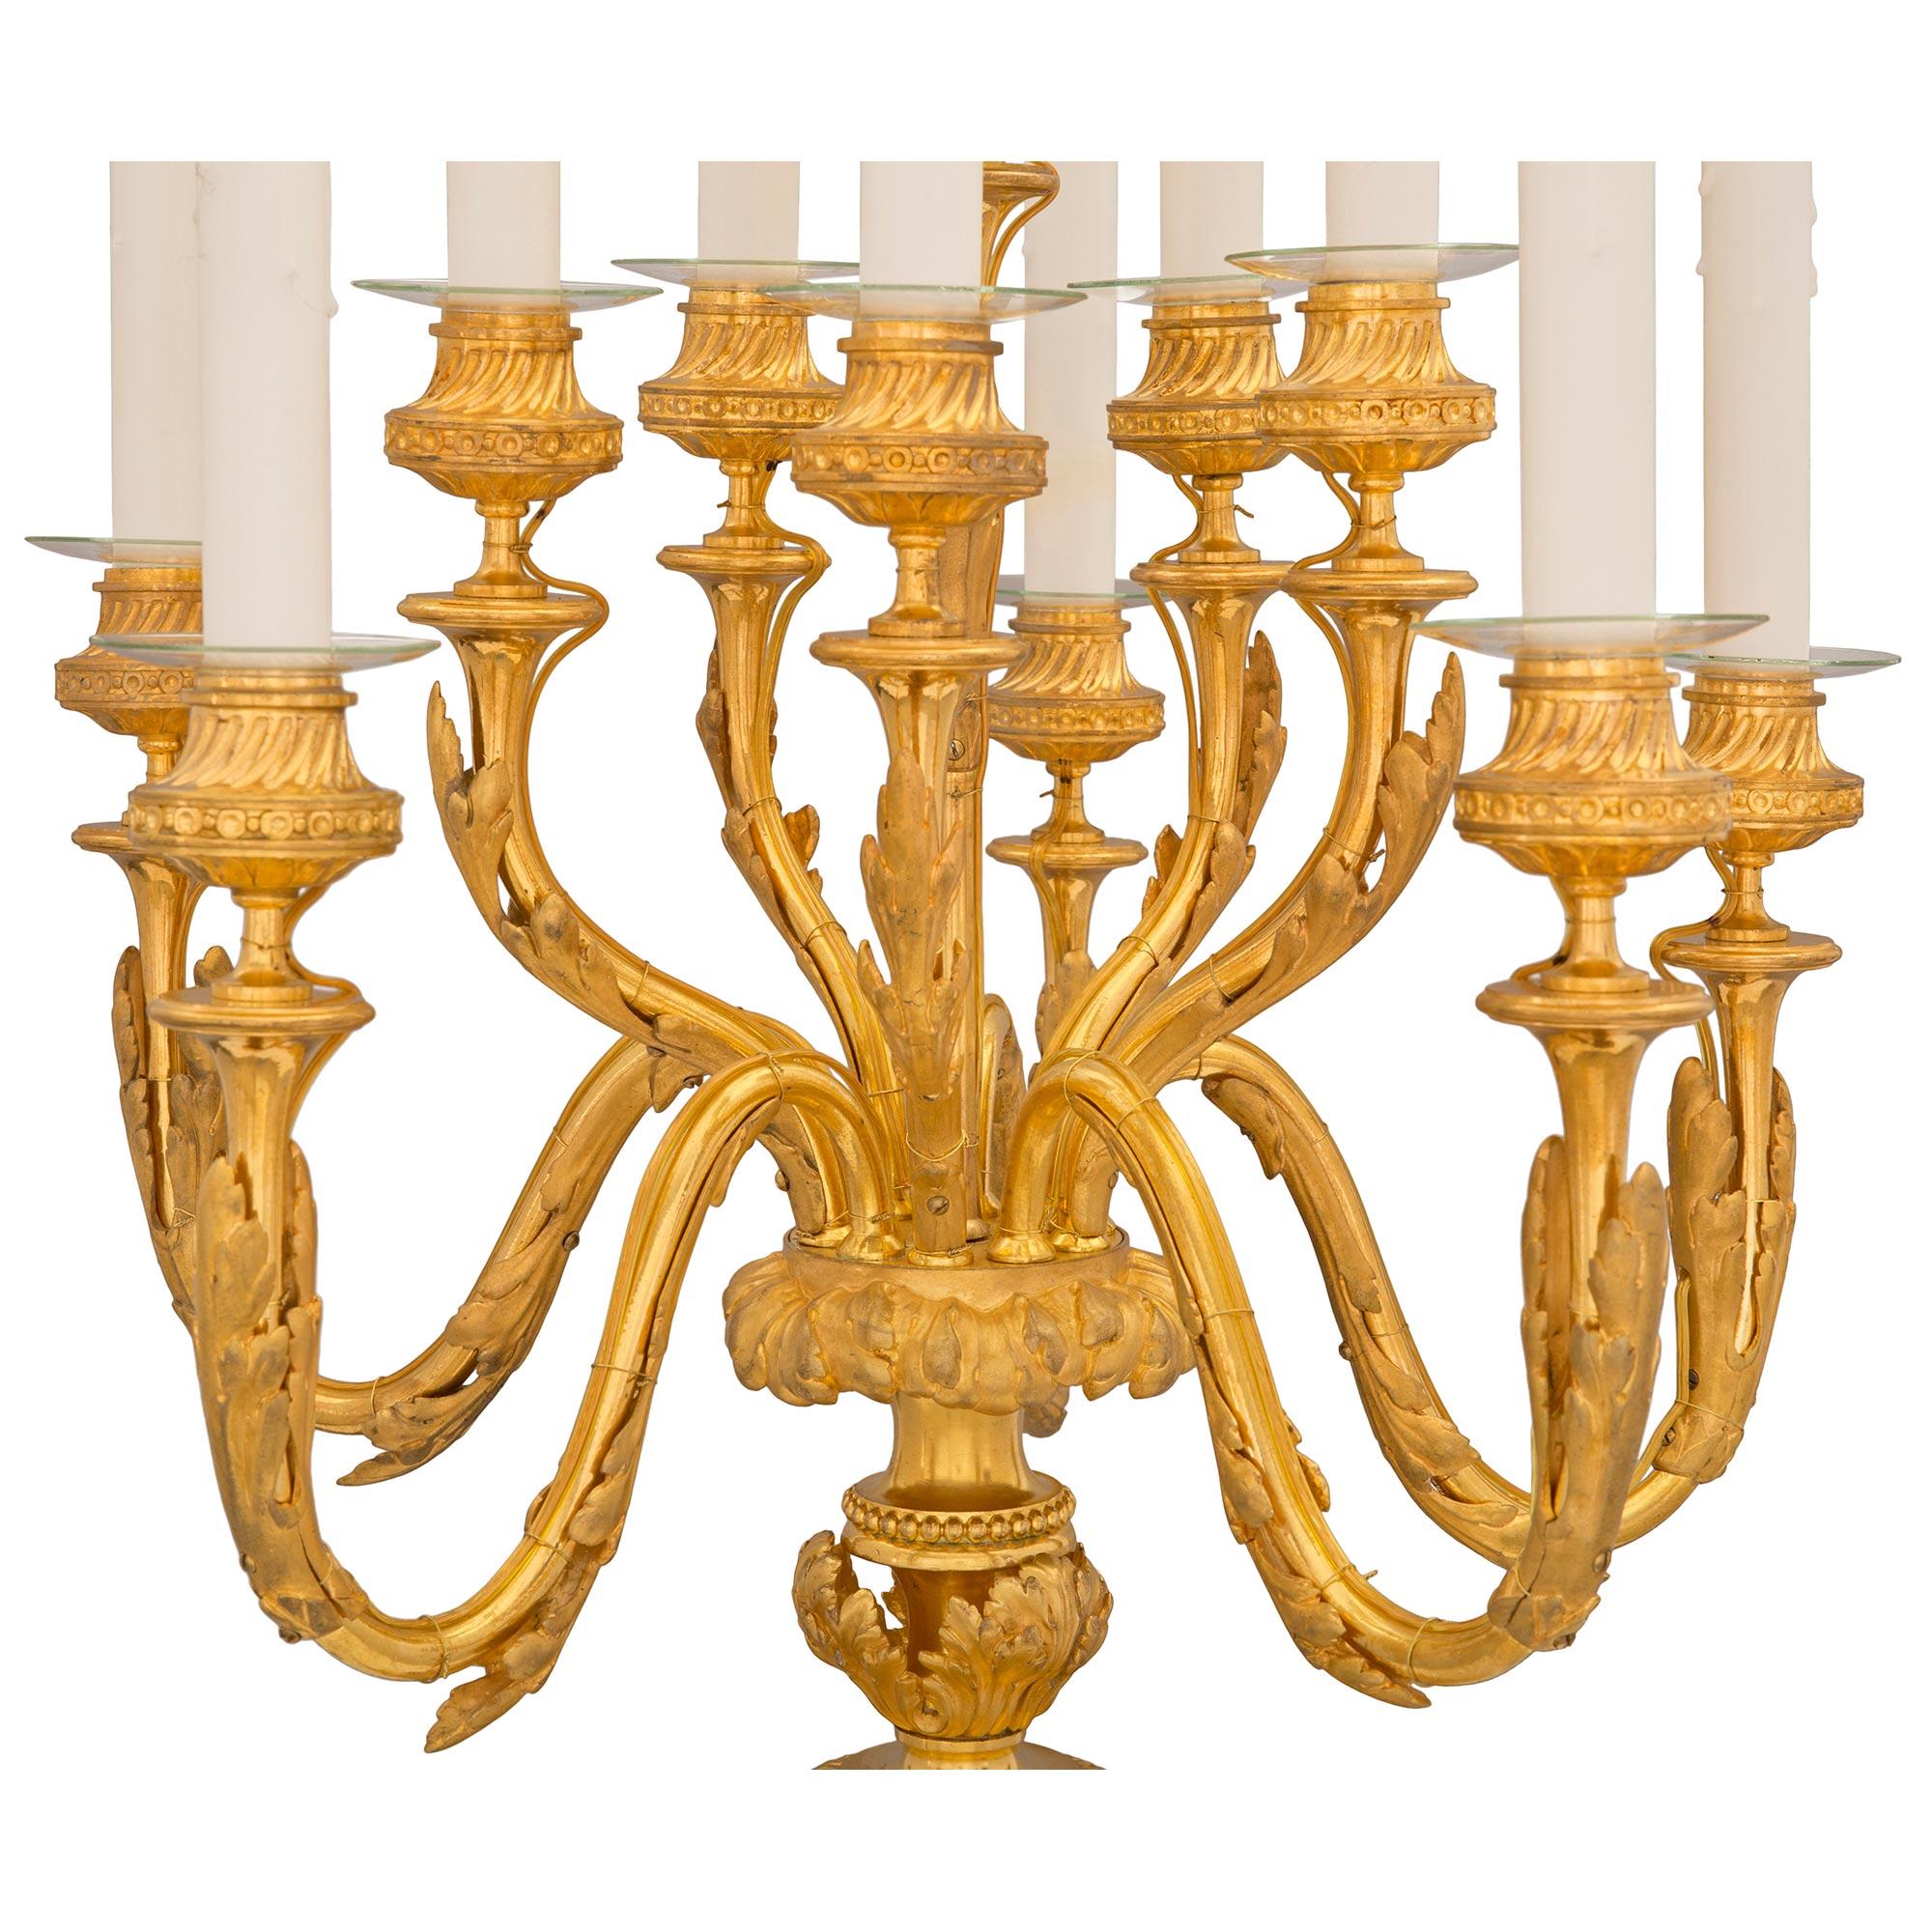 Pair of French 19th Century Louis XVI St. Electrified Ormolu Candelabras In Good Condition For Sale In West Palm Beach, FL